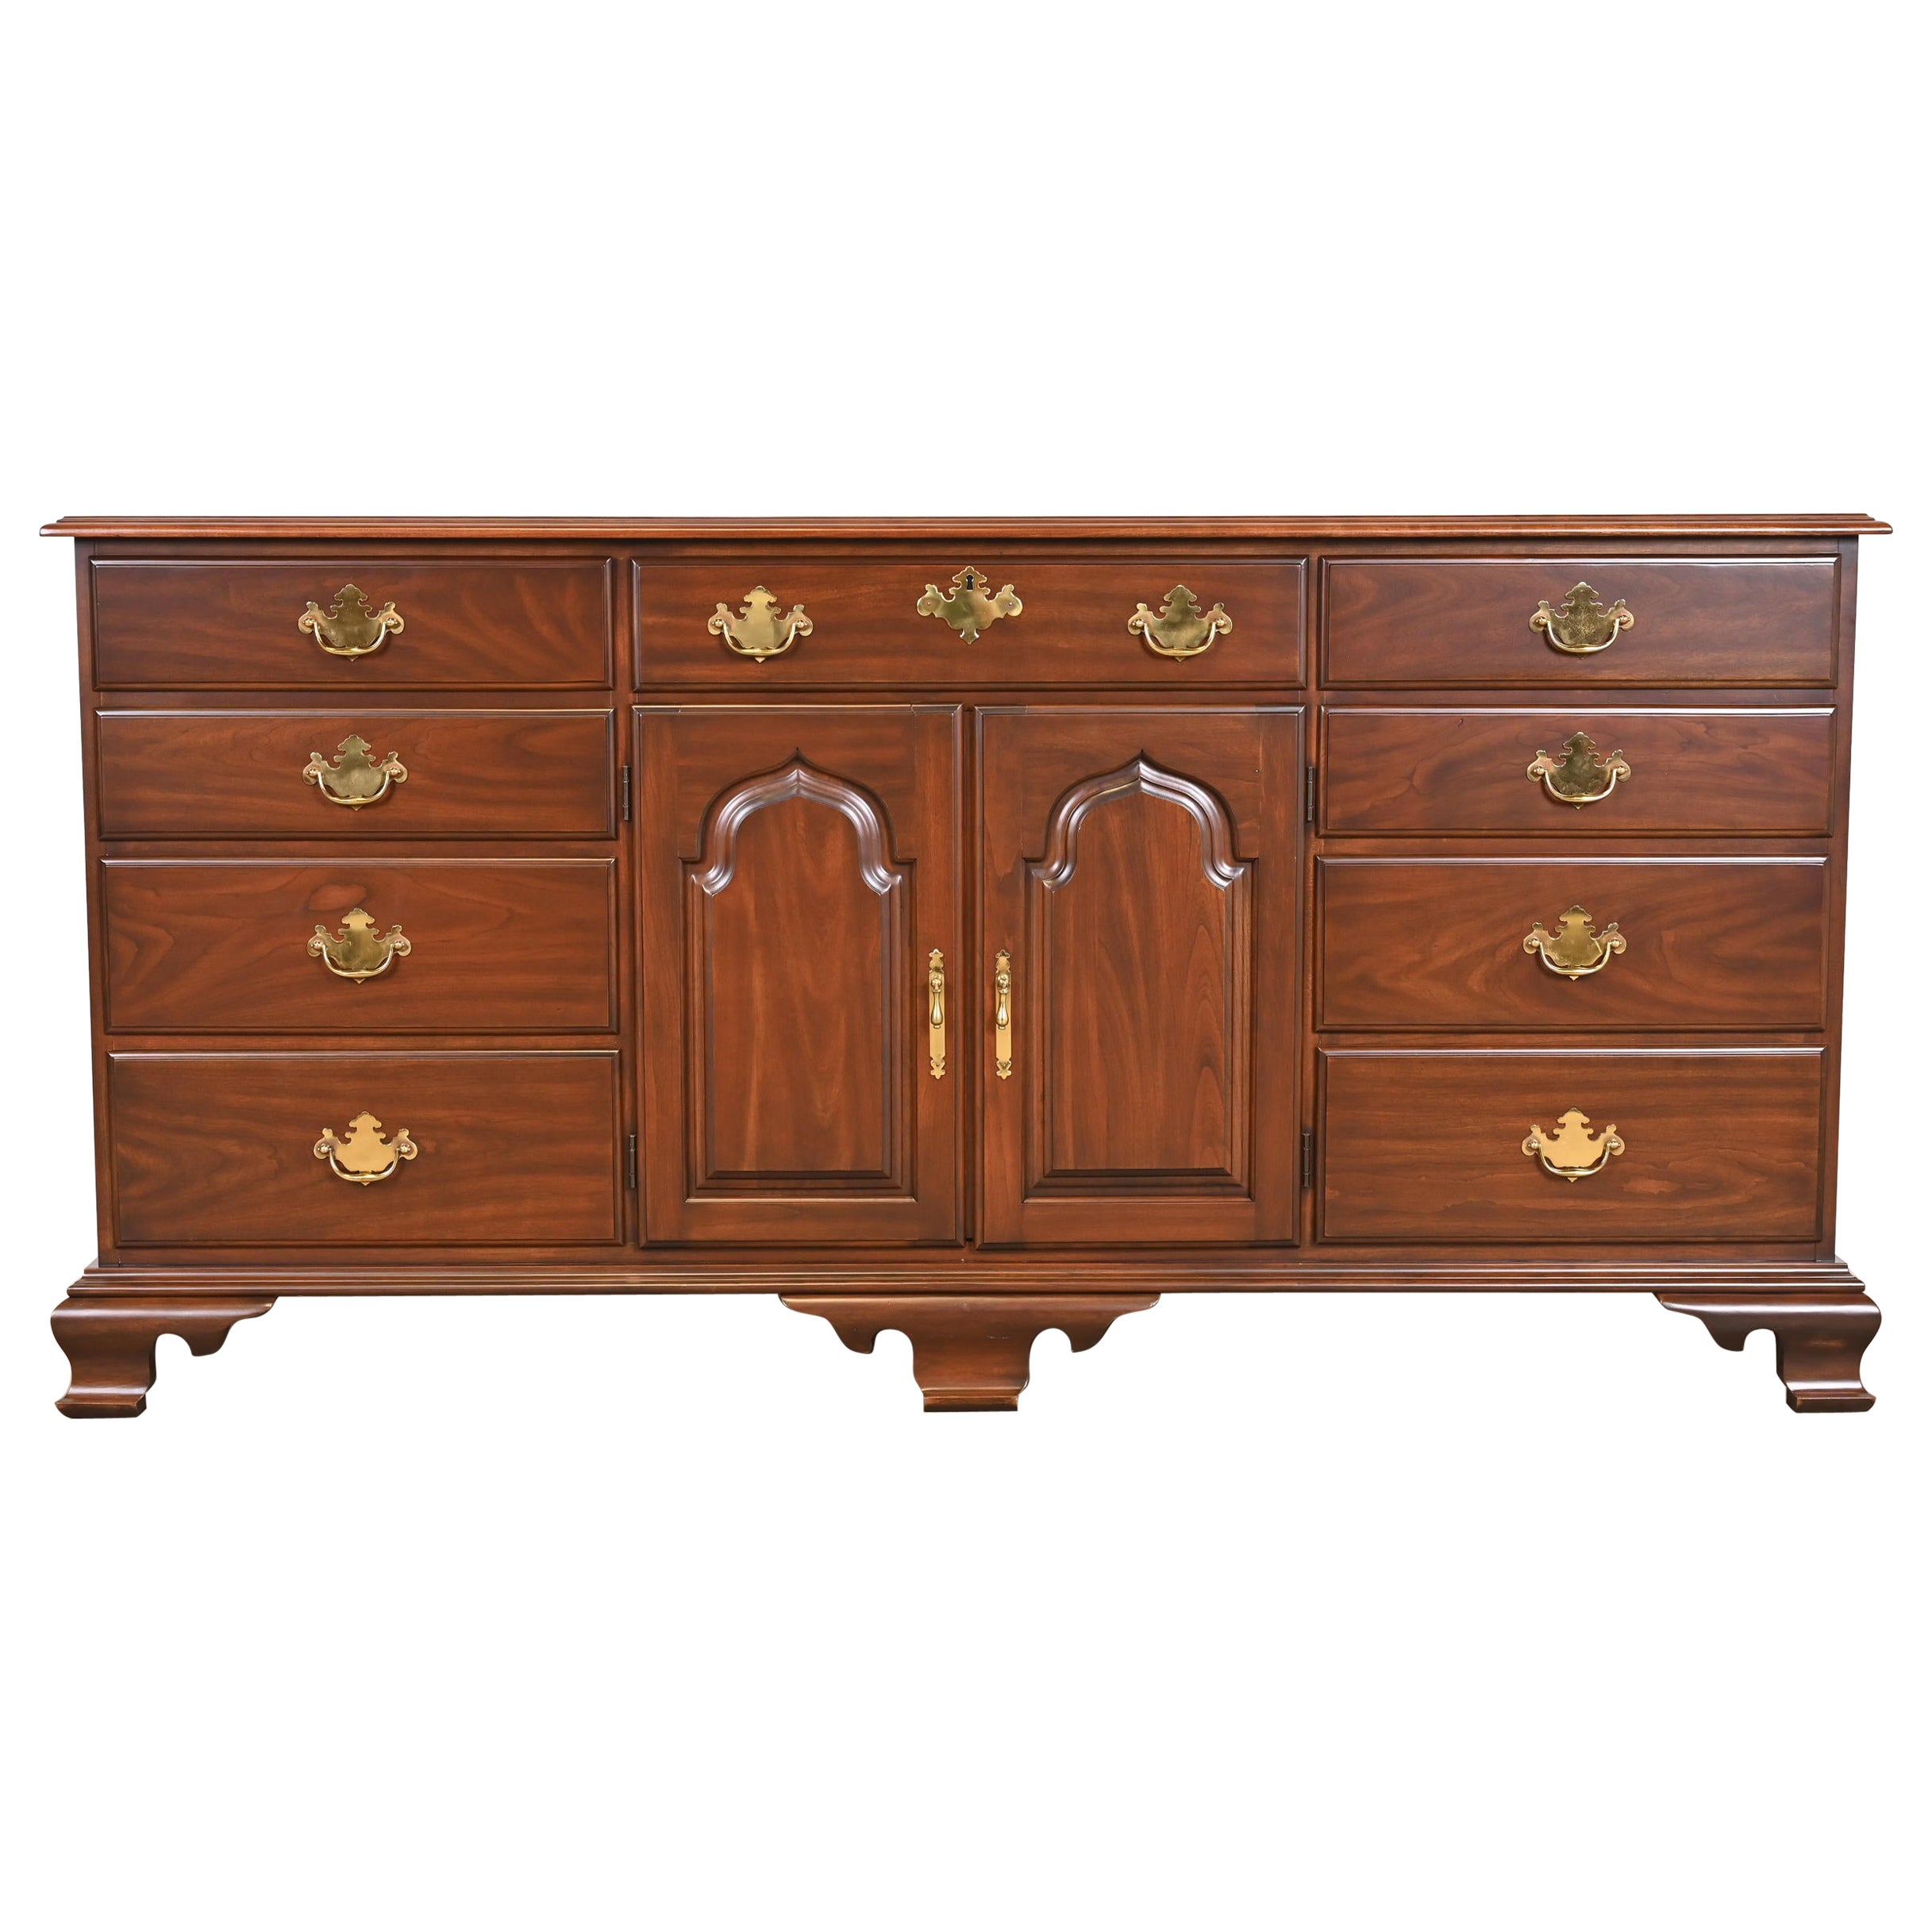 Harden Furniture Georgian Solid Cherry Wood Long Dresser, Newly Restored For Sale